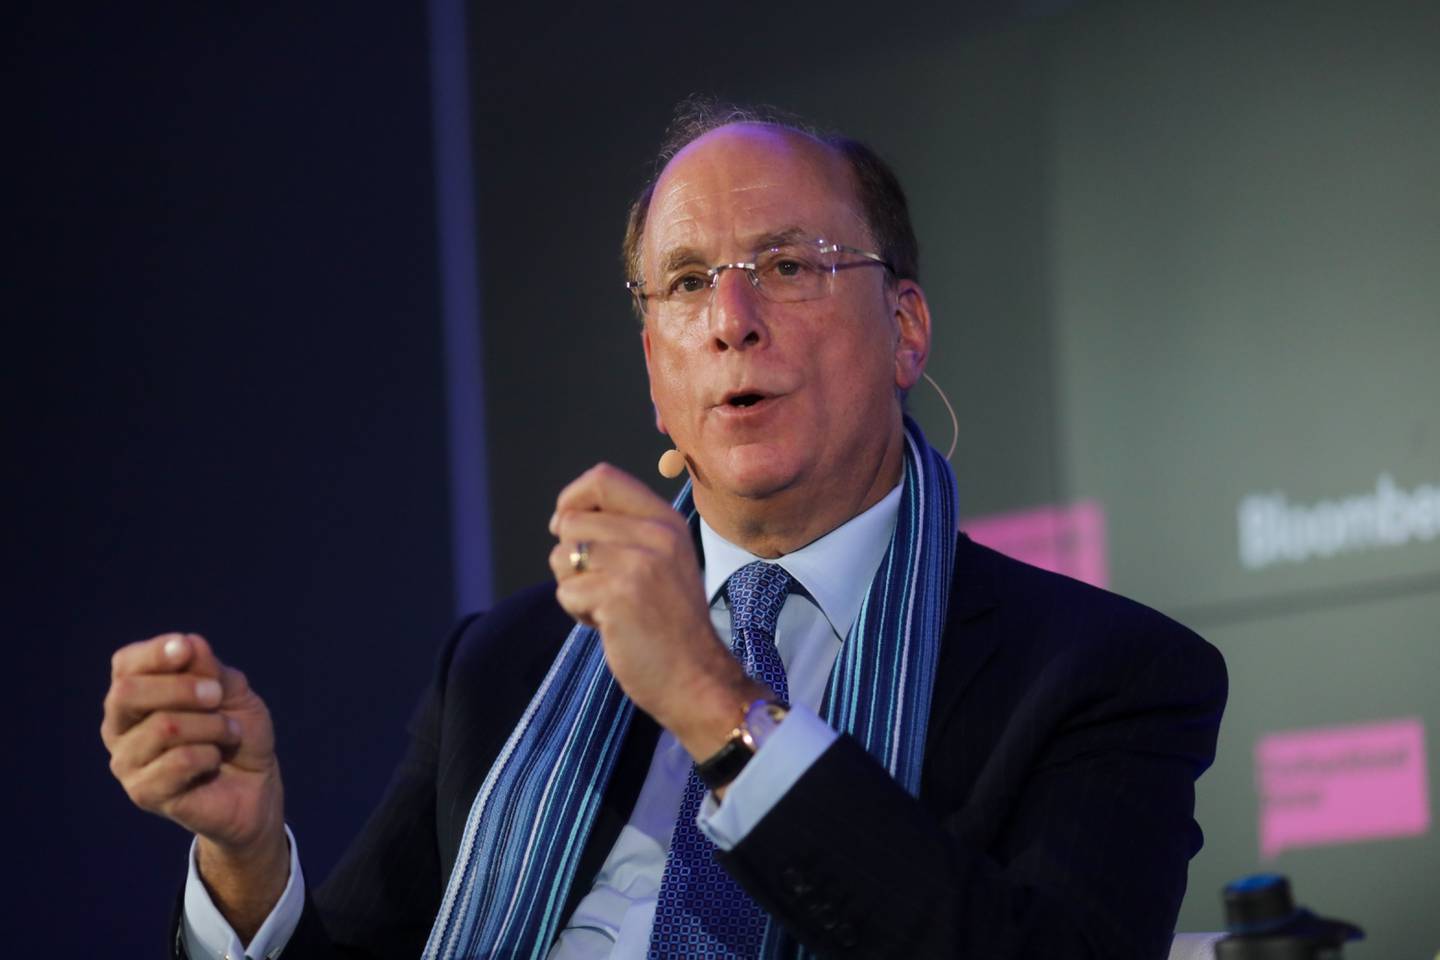 The executive director of BlackRock Inc. gestures while speaking at a Bloomberg event on the opening day of the World Economic Forum in Davos, Switzerland, on Tuesday, January 21, 2020.dfd